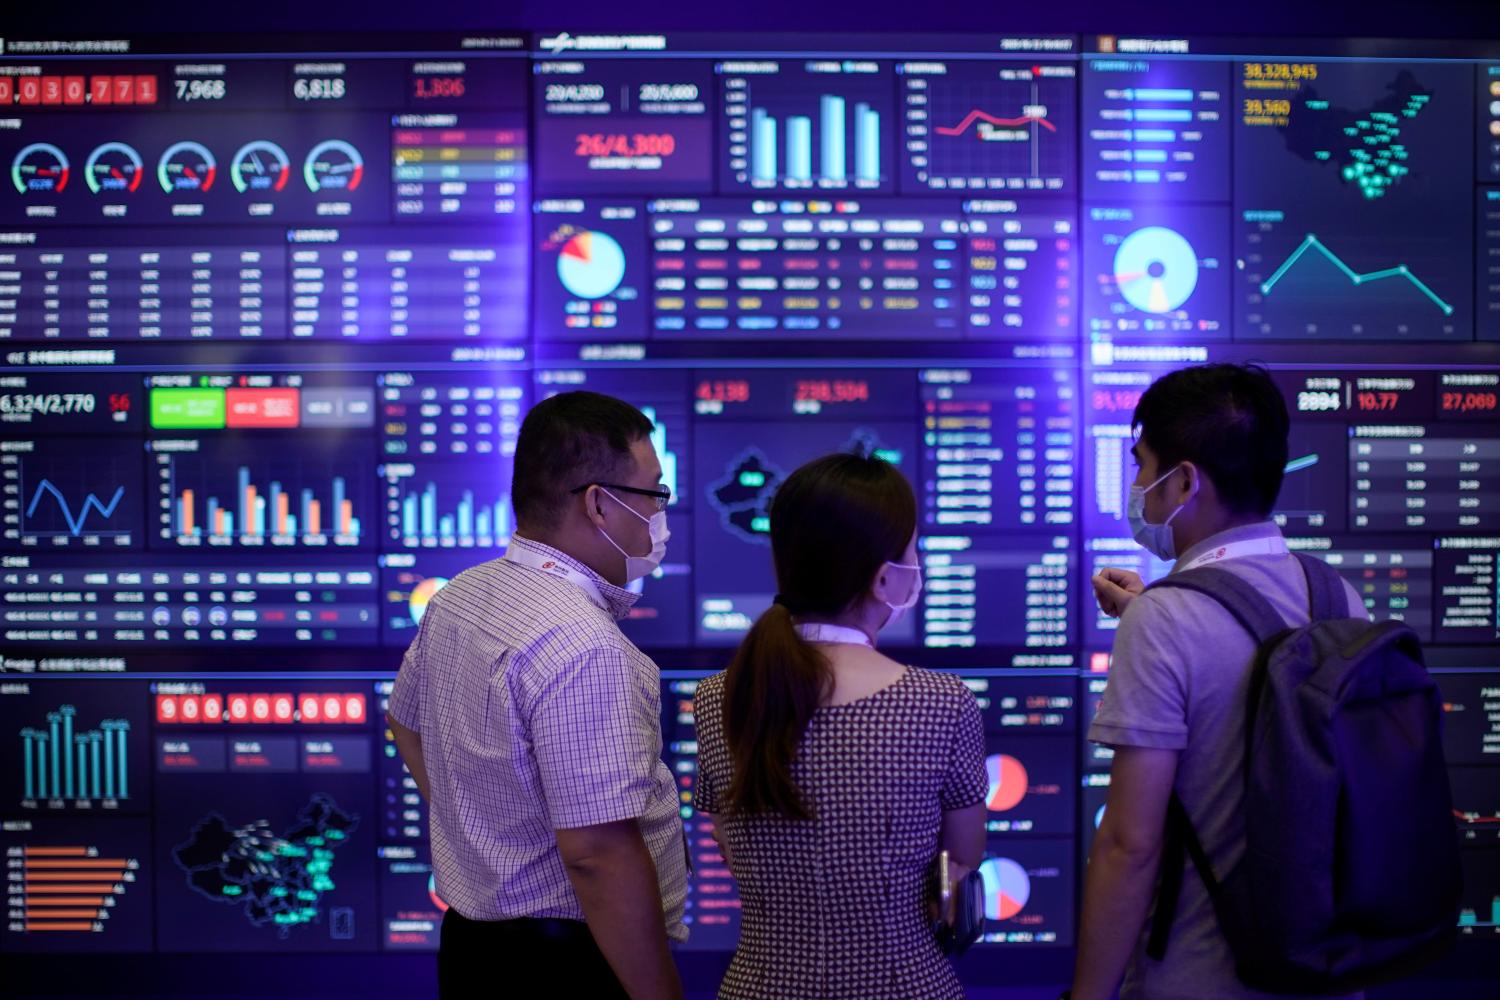 People visit a booth during the Huawei Connect conference in Shanghai, China.